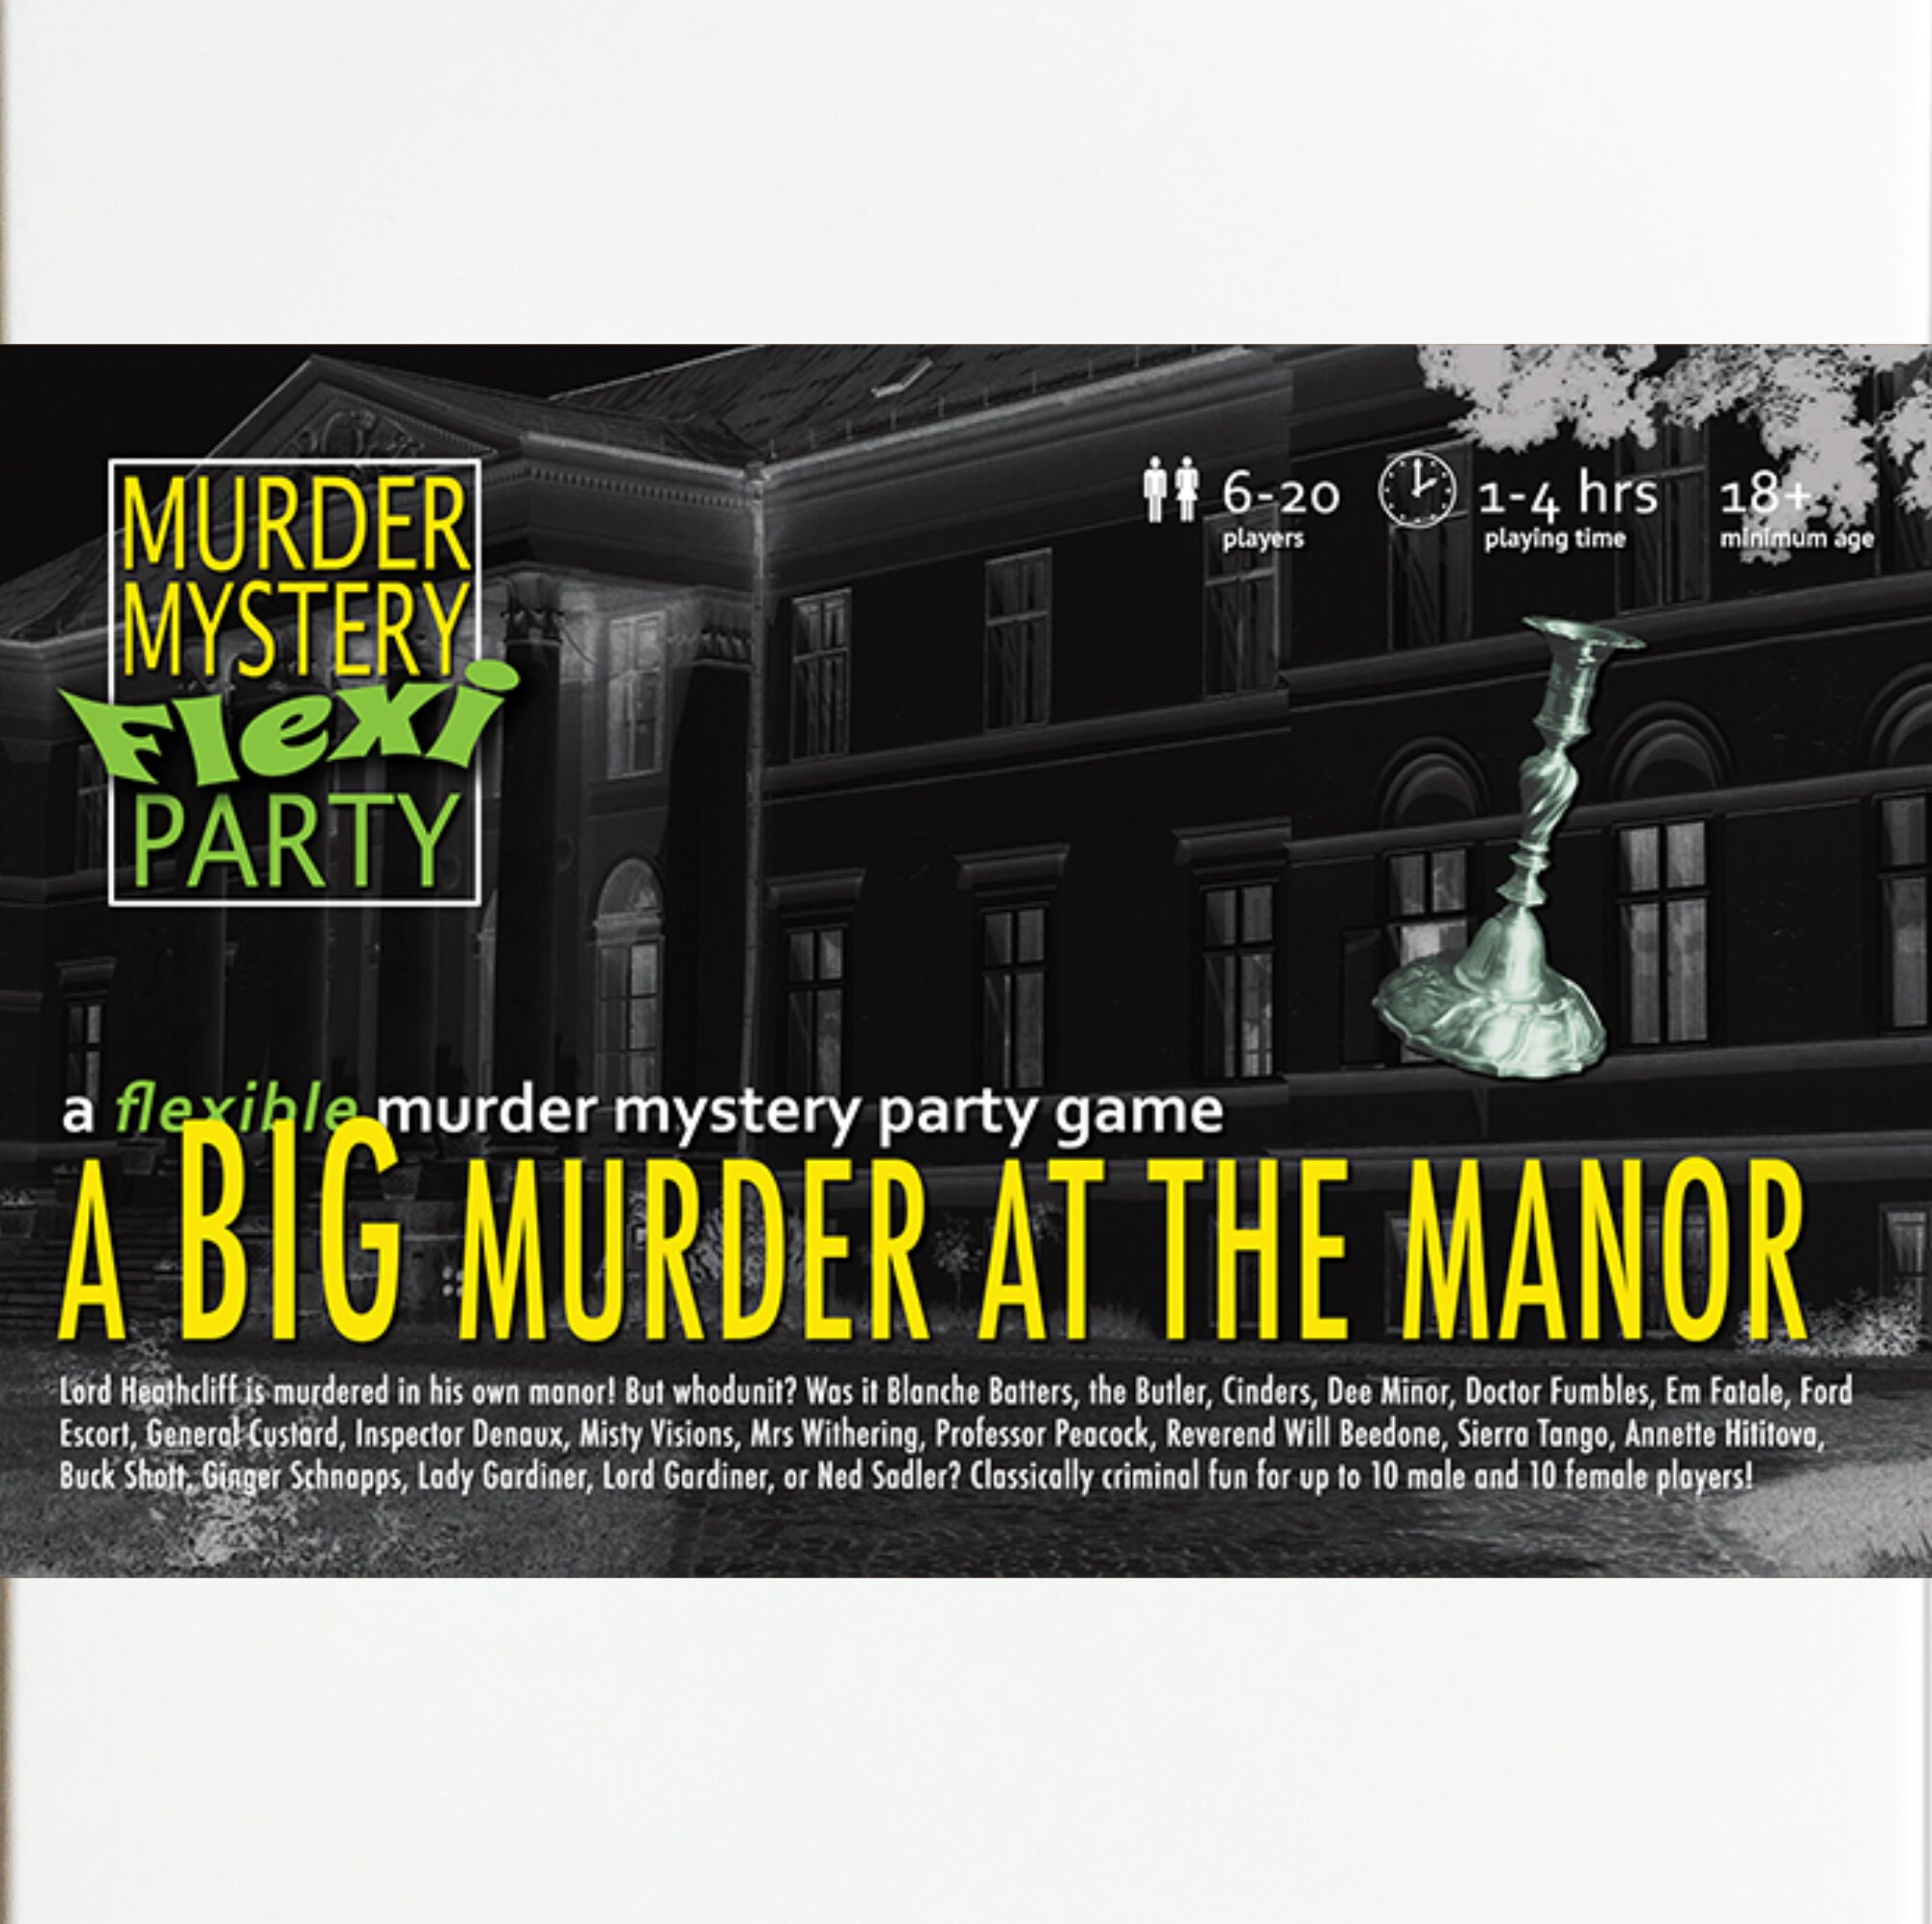 Manor House 6-20 Player Murder Mystery a Flexible Dinner pic